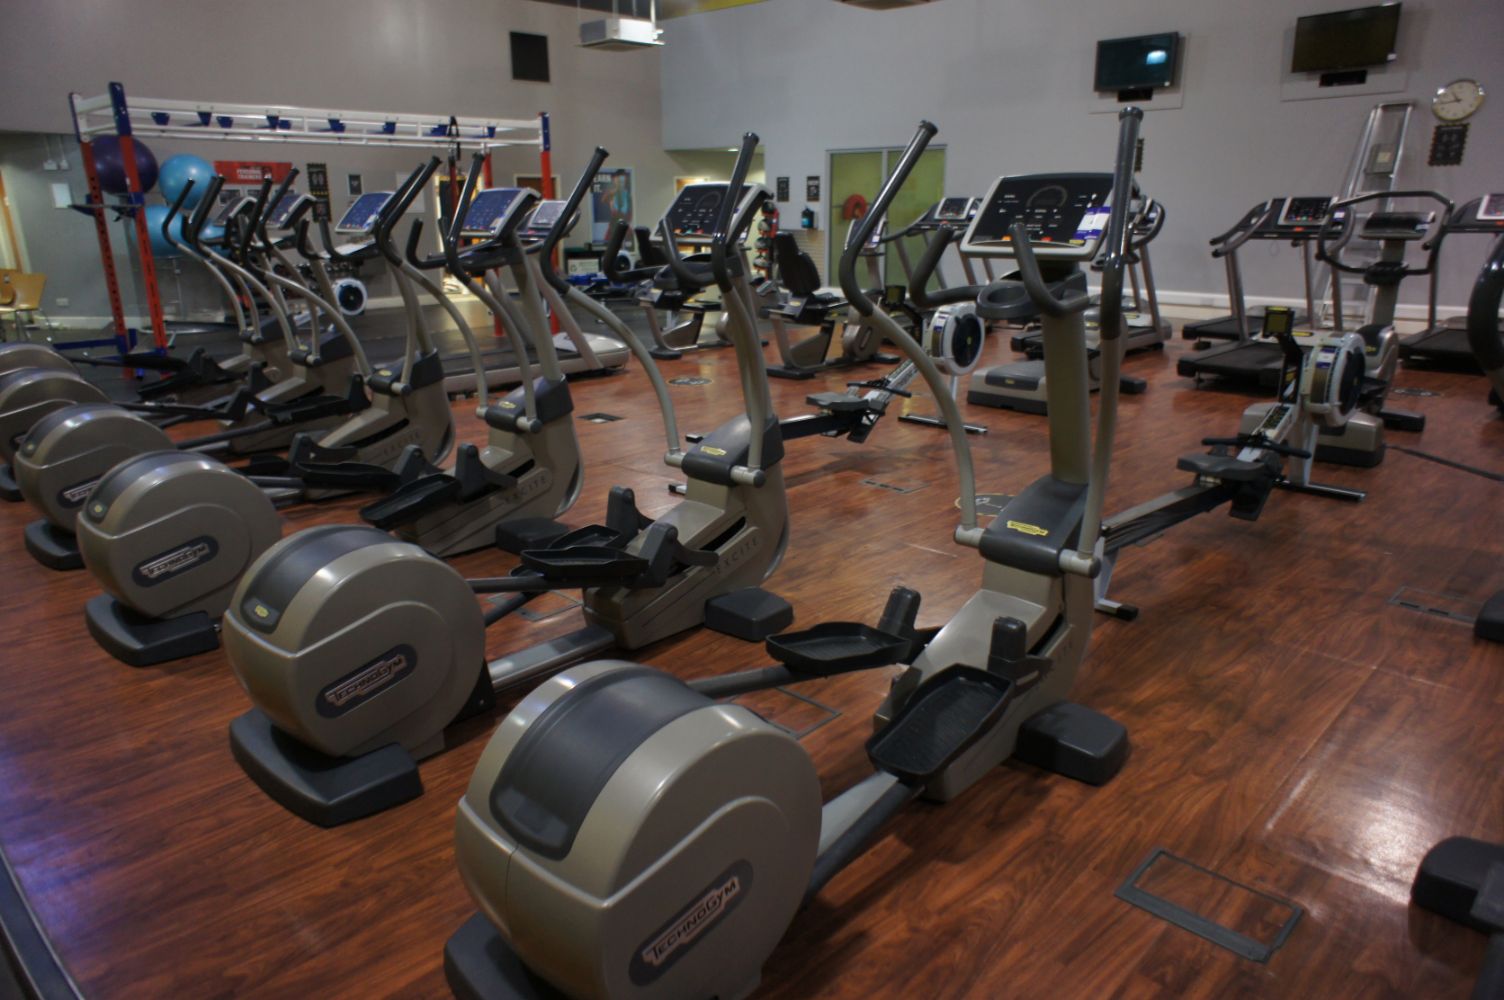 Large Collection of Commercial Technogym and Fitness Equipment